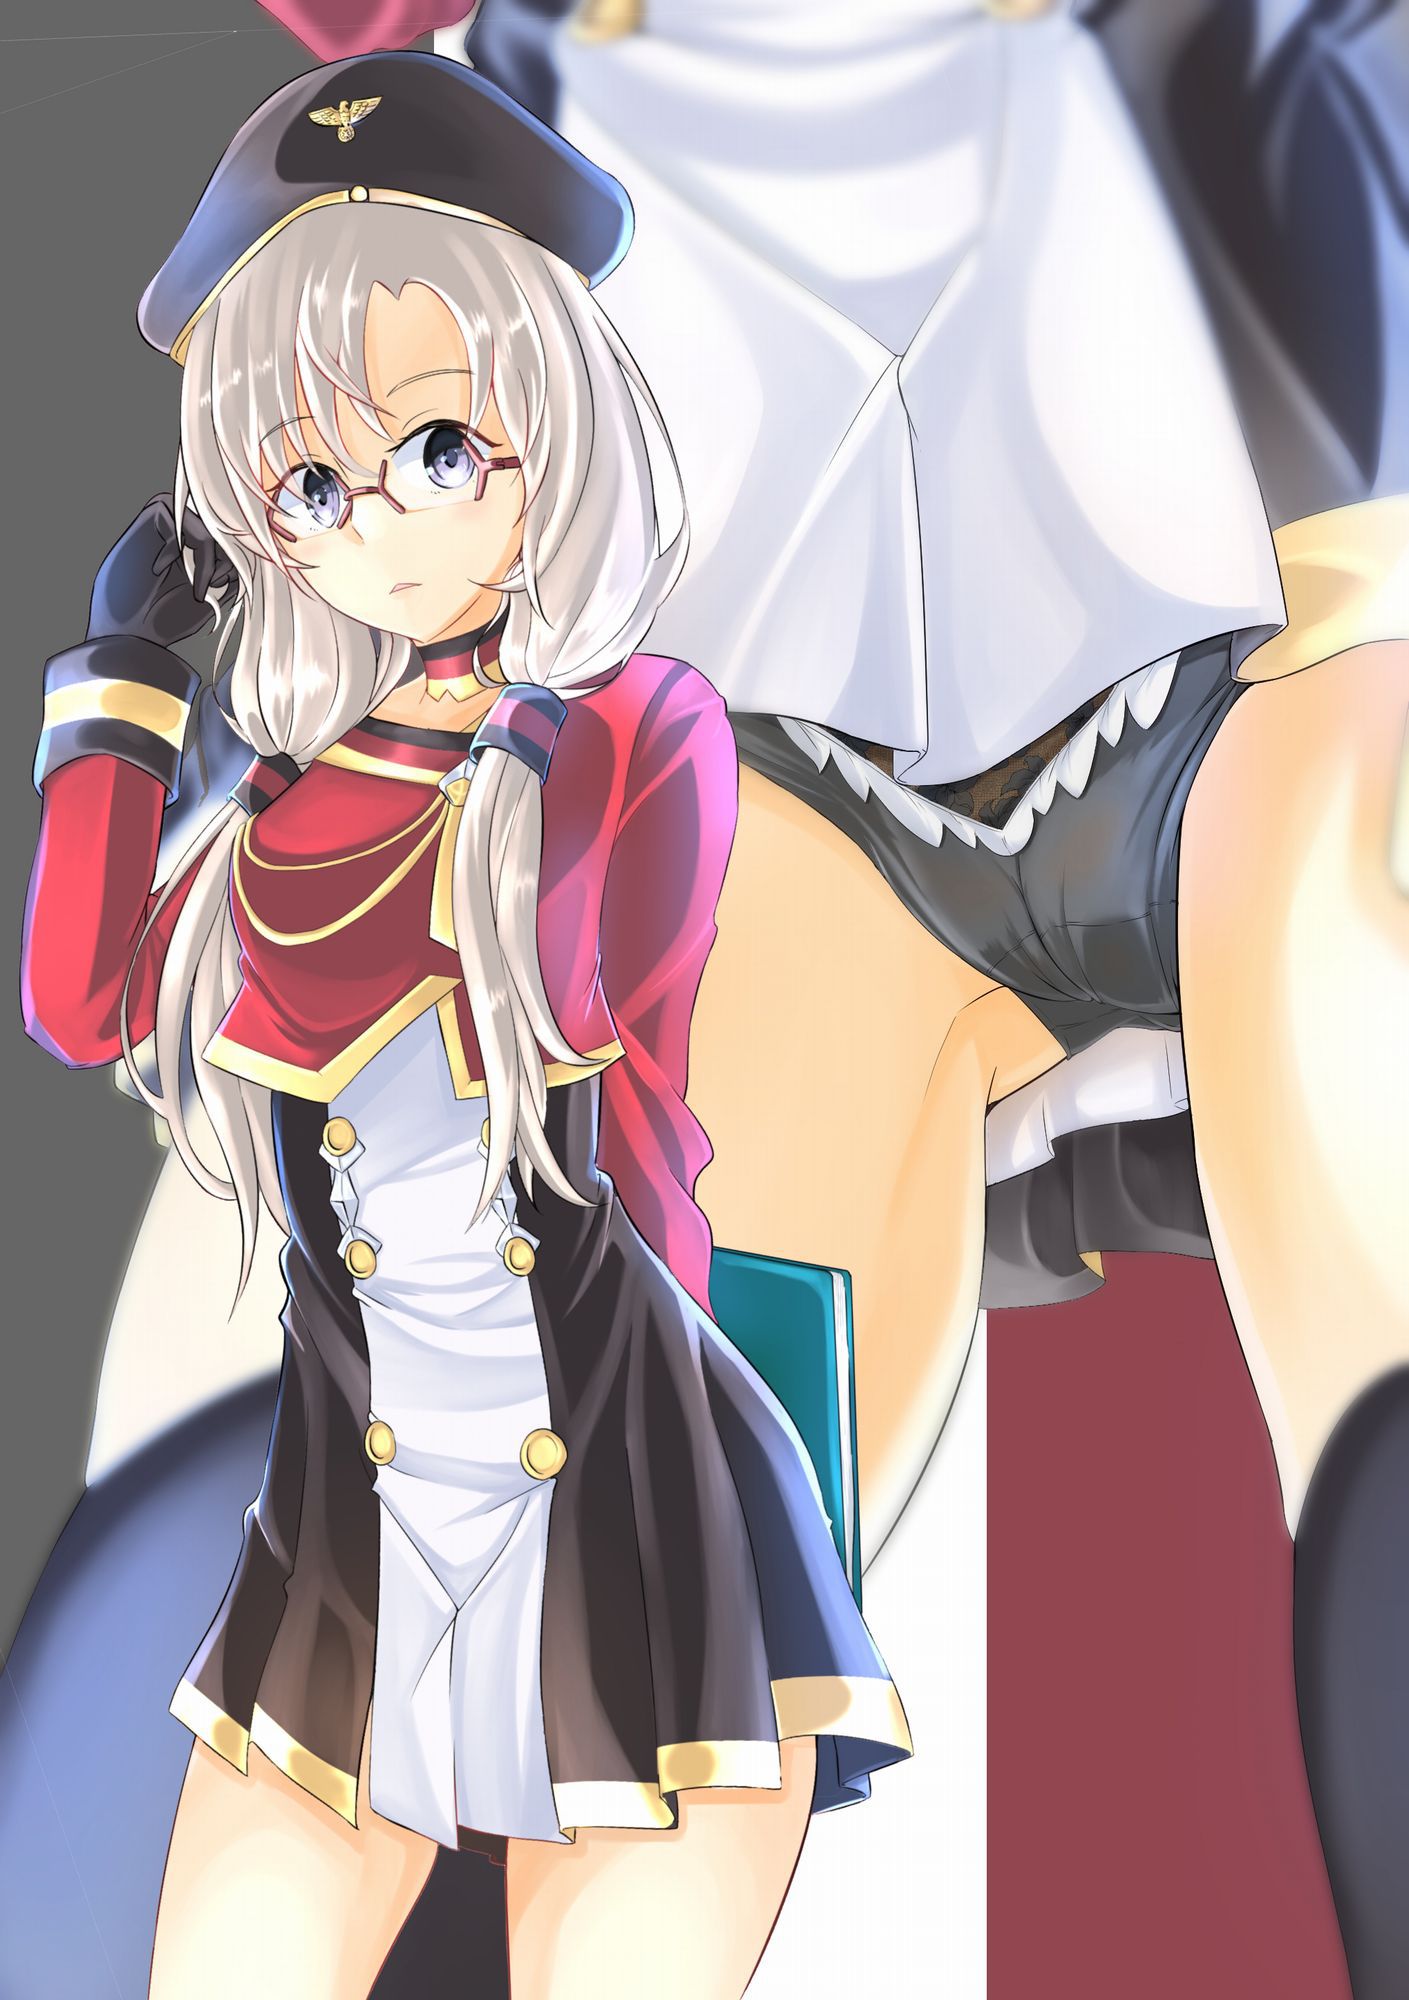 [Secondary ZIP] The skirt image of the rainbow pretty happy if you see for the time being 9